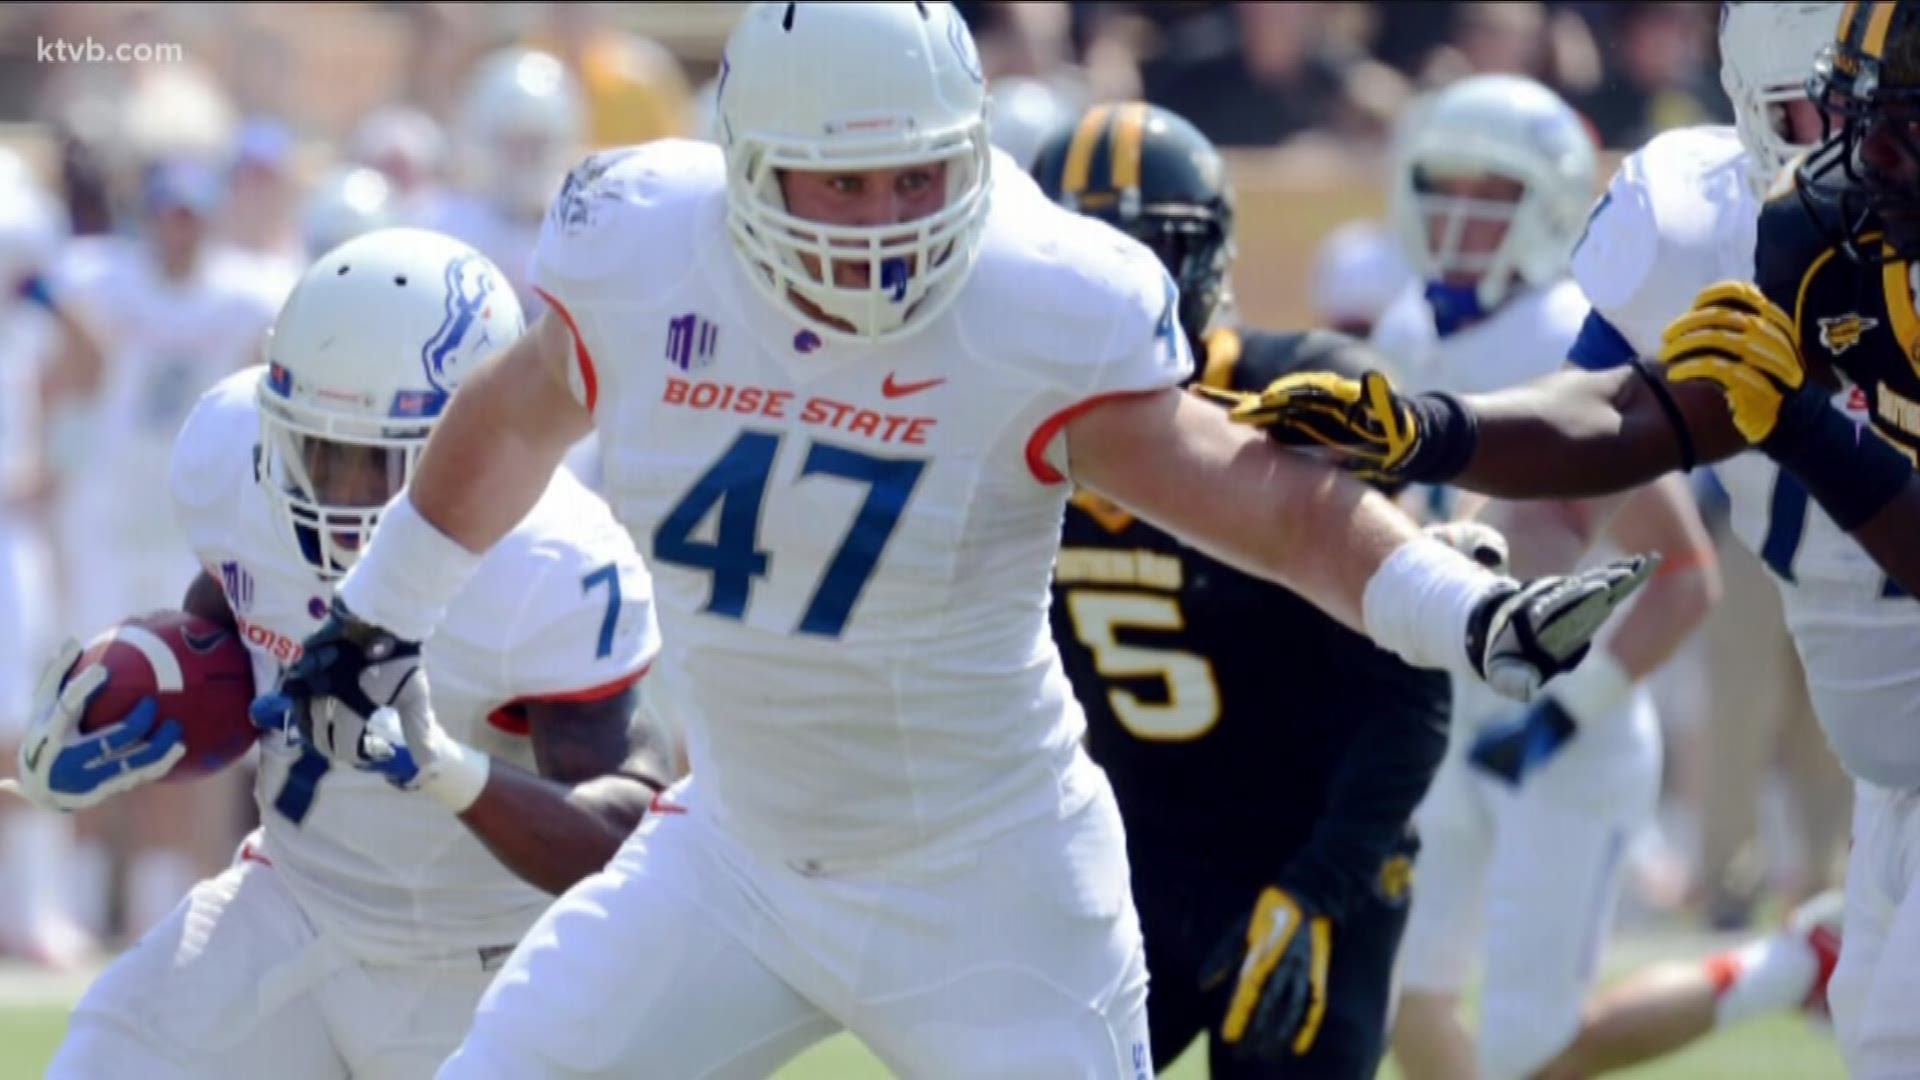 Dan Paul, who played for the Broncos between 2008-2012, passed away at the age of 30.